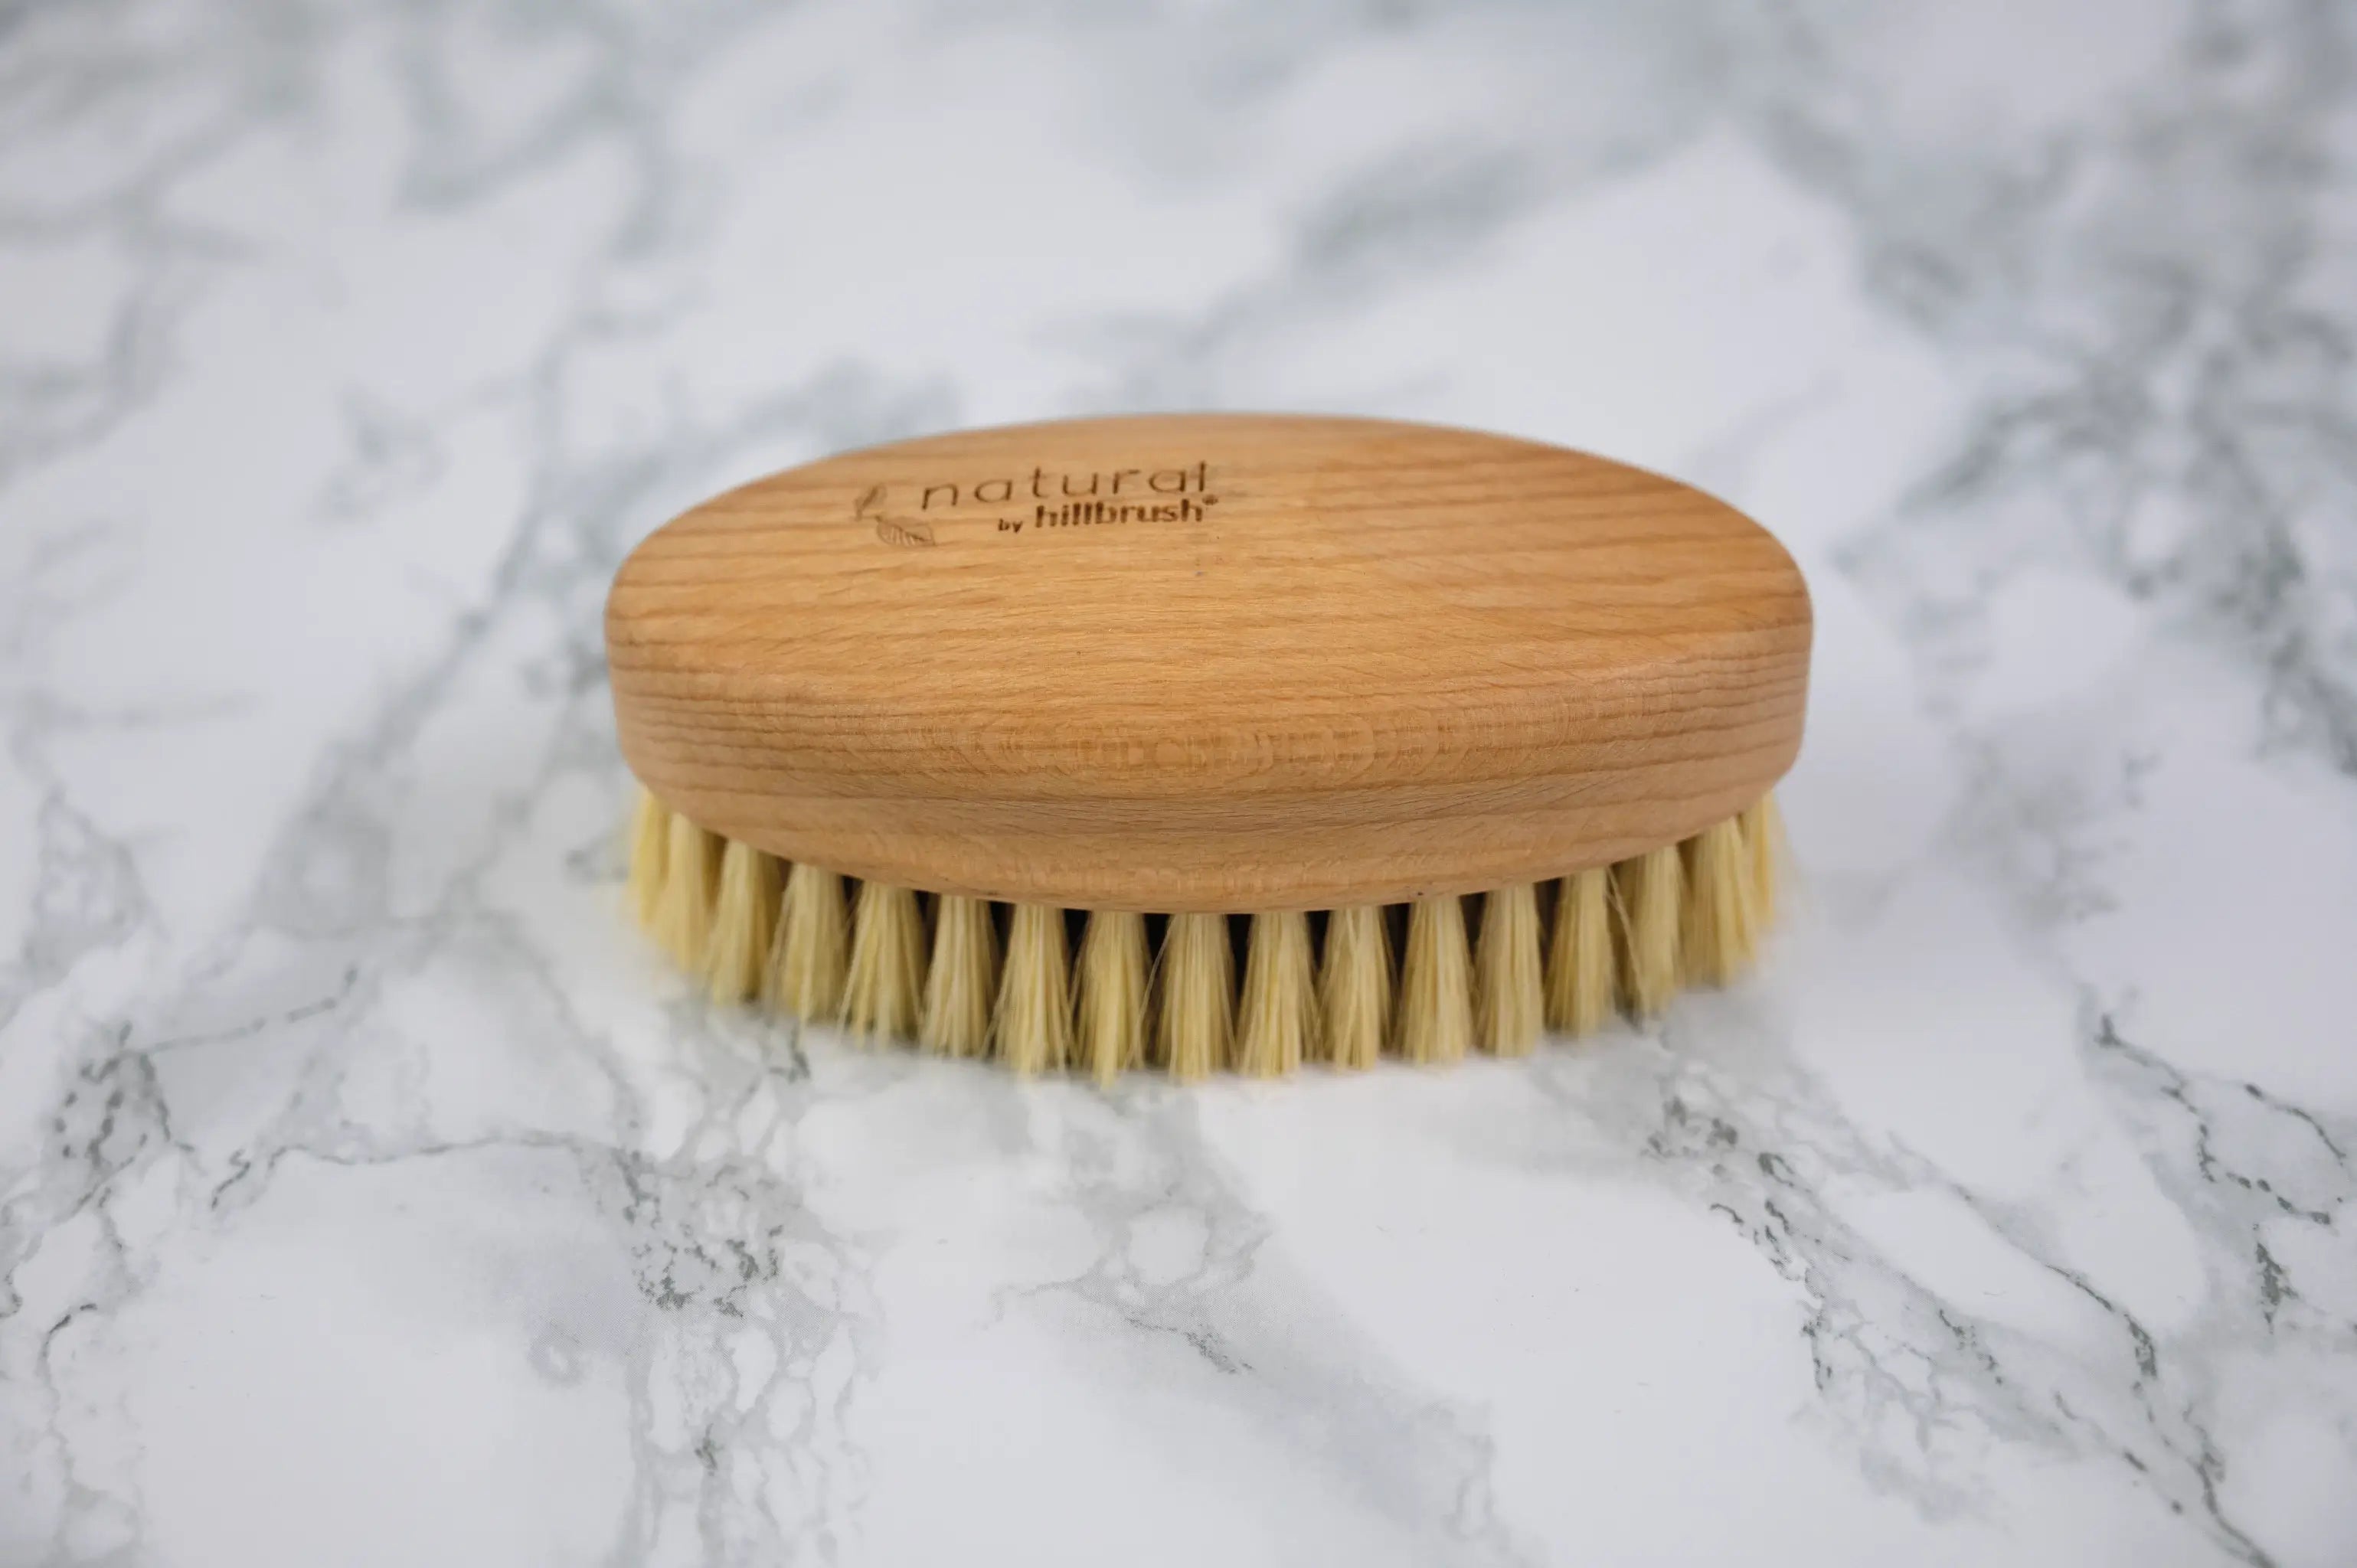 A large oval wooden vegetable brush with thick fibres sits on a marble surface. Made by UK makers Hillbrush